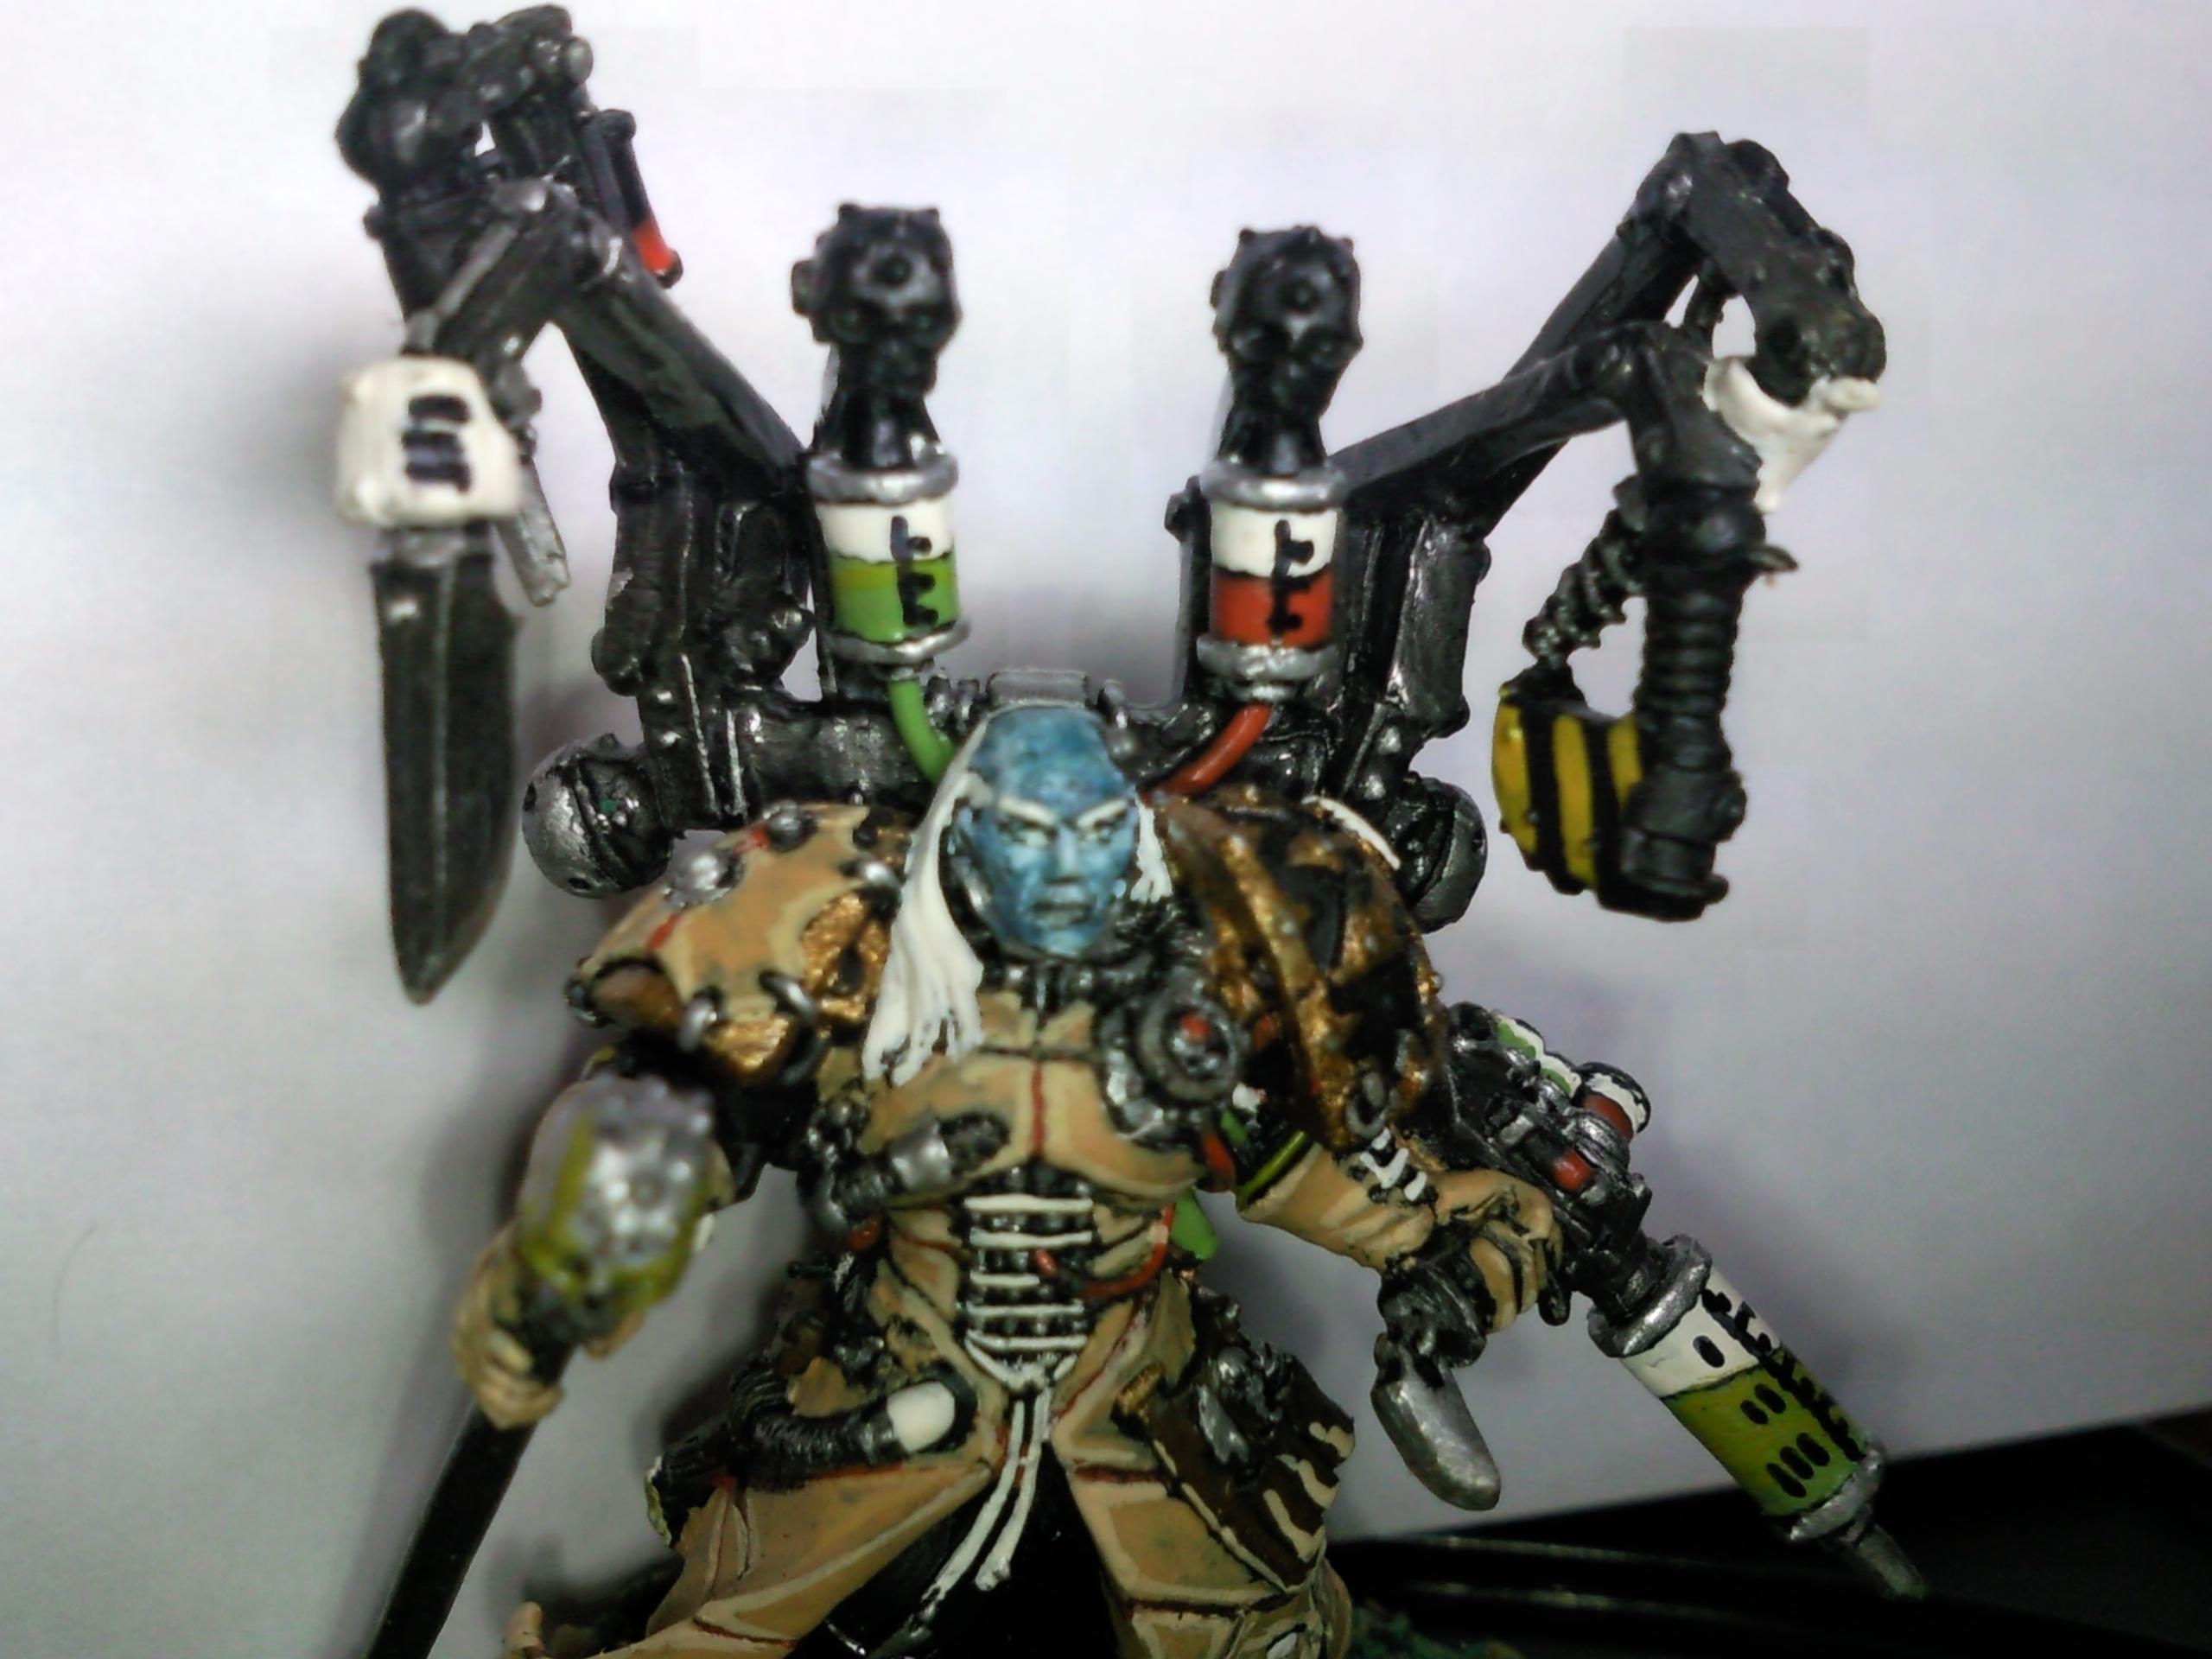 Army, Chaos, Chaos Lord, Chaos Space Marines, Fabius Bile, Warhammer 40,000, Work In Progress